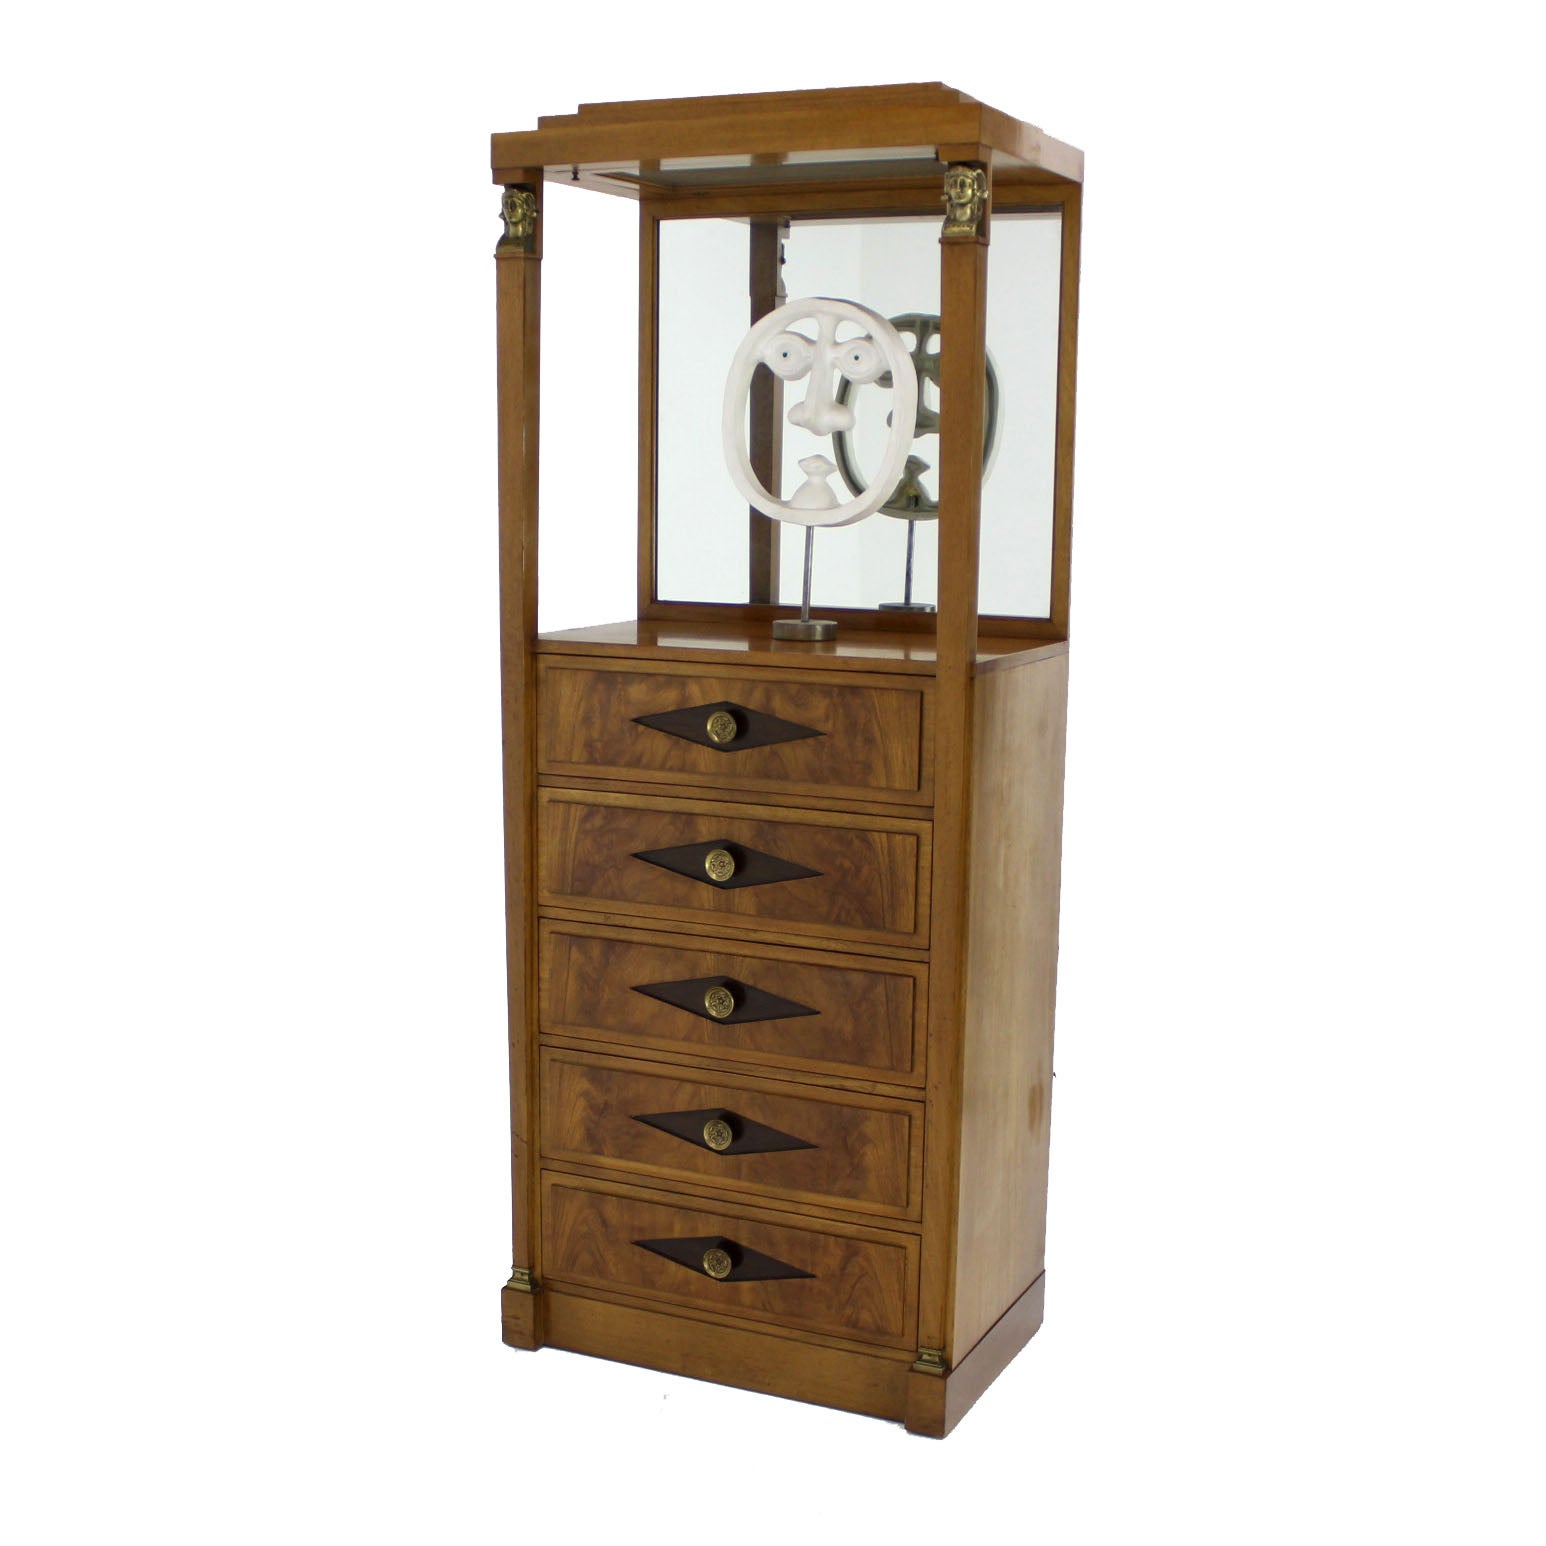 Empire Vitrine Light Up Display Cabinet or Chest of Drawers